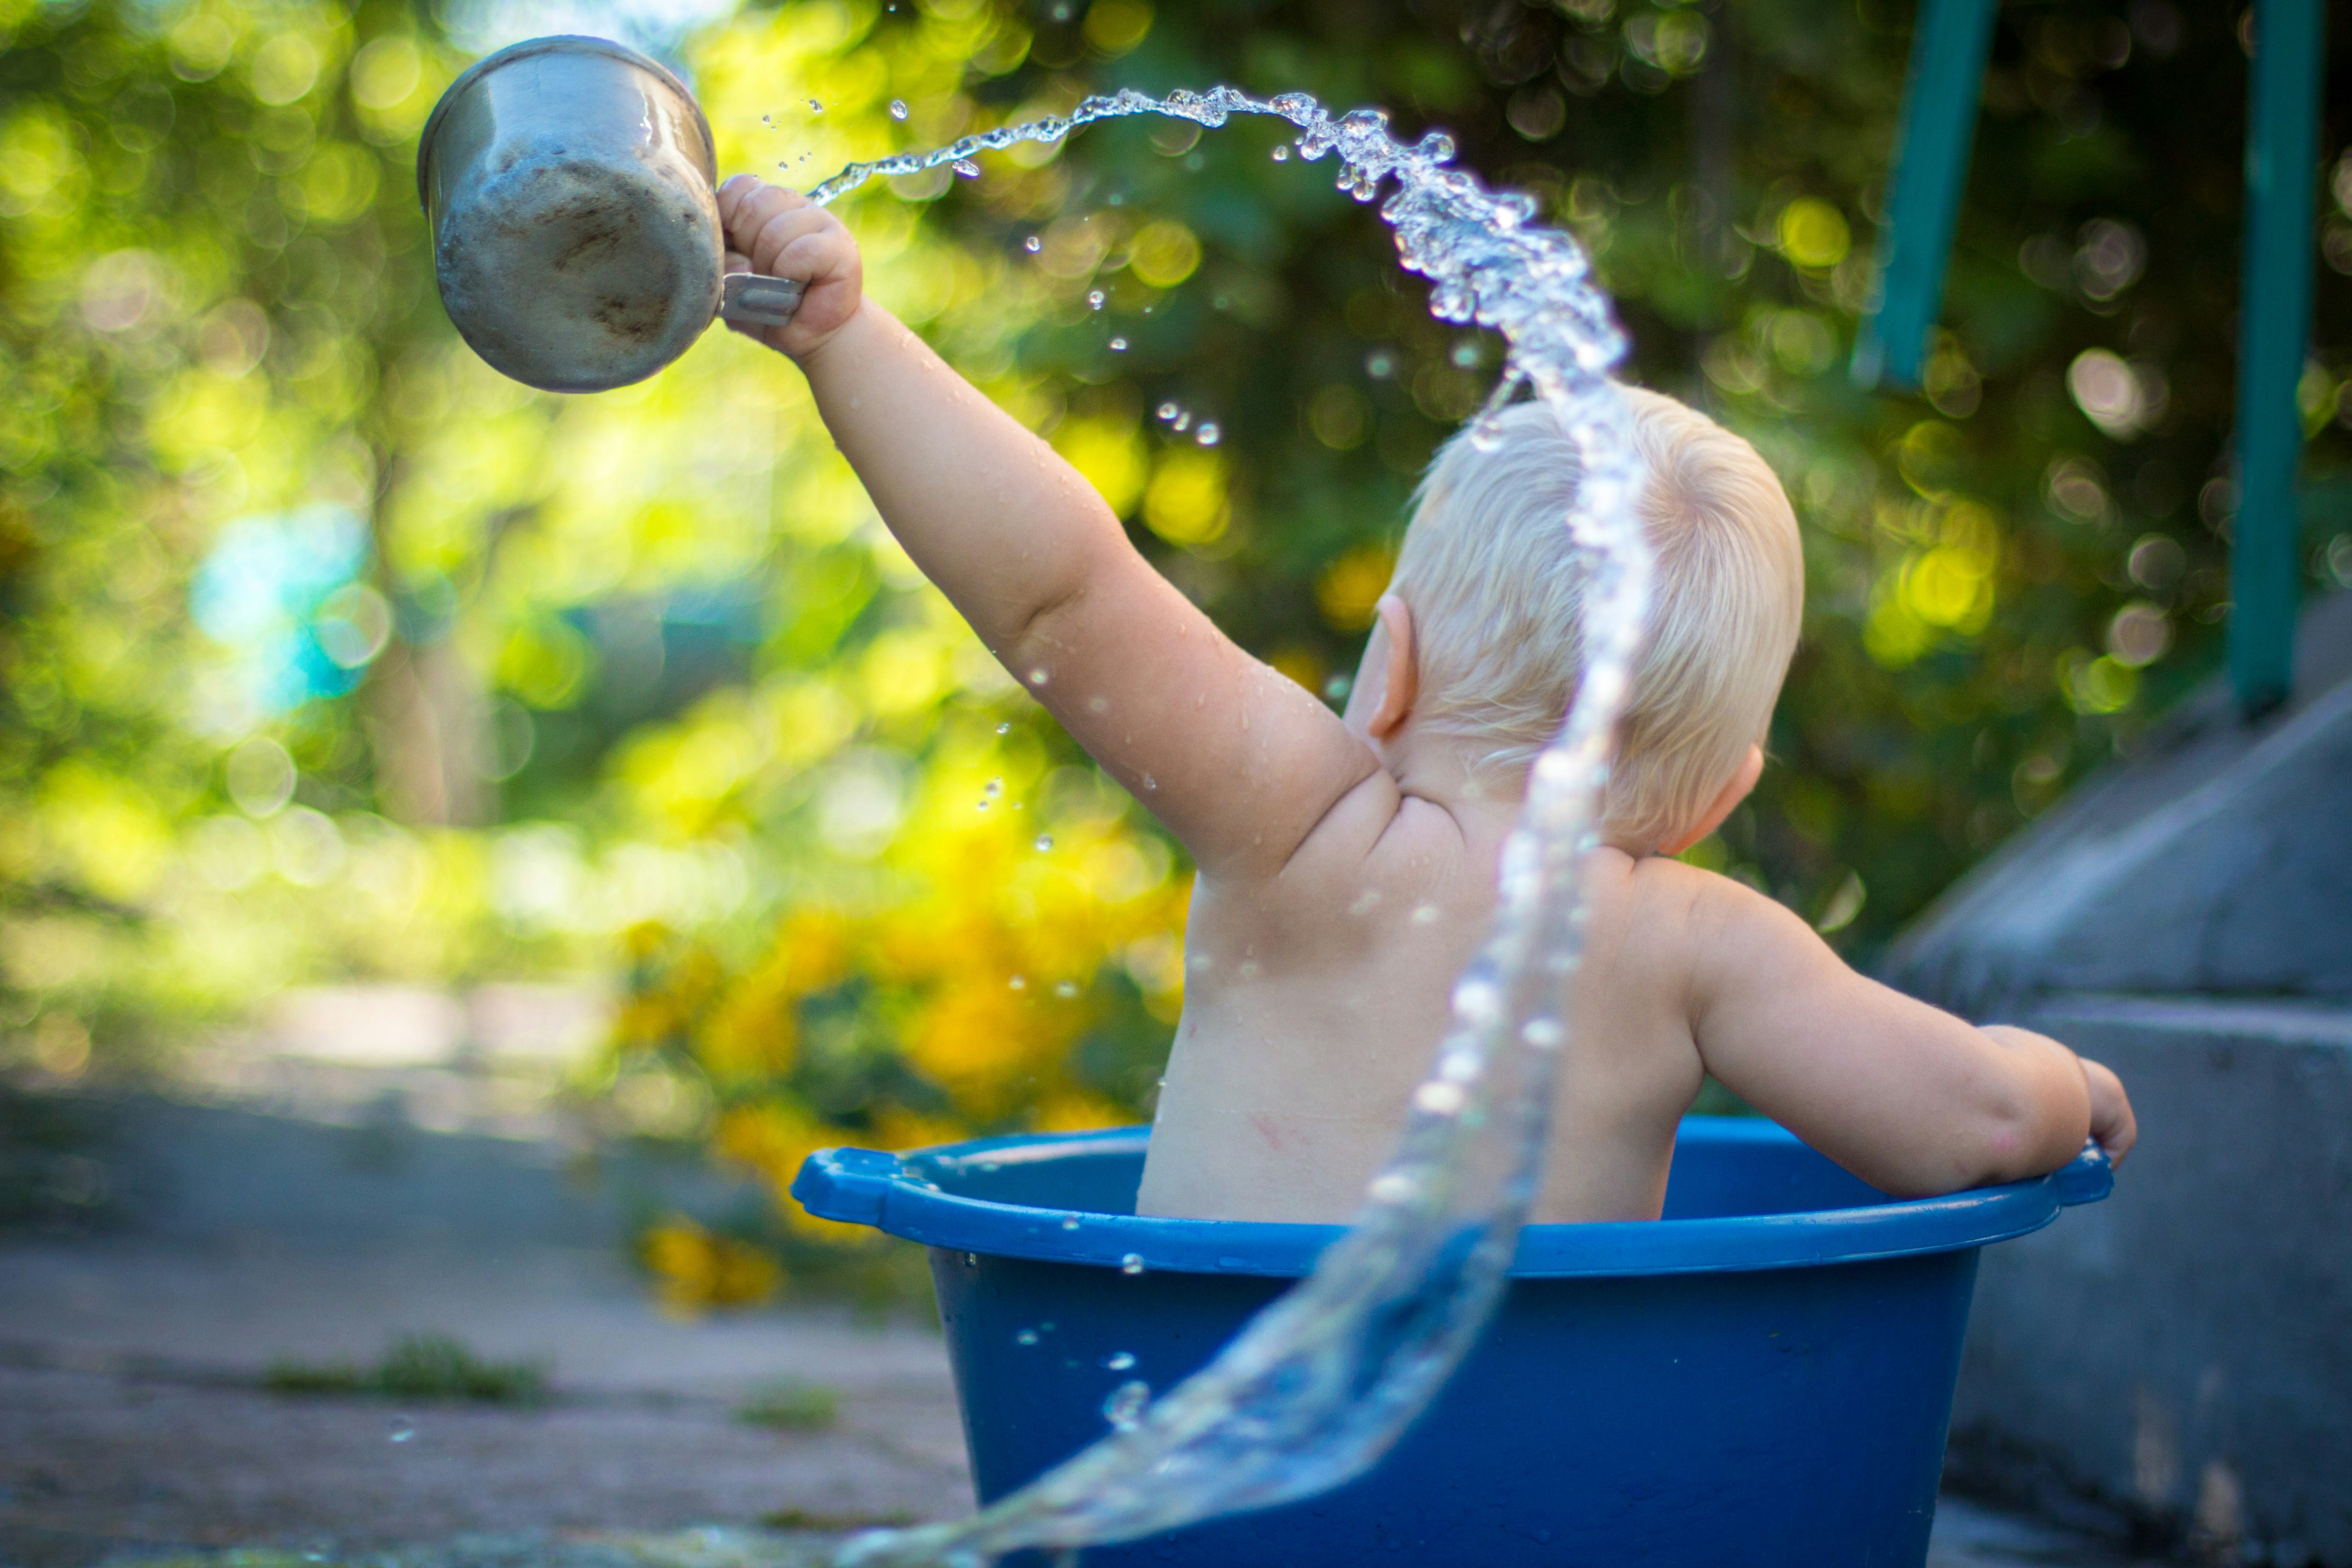 Baby back seated in a blue bucket playing with water